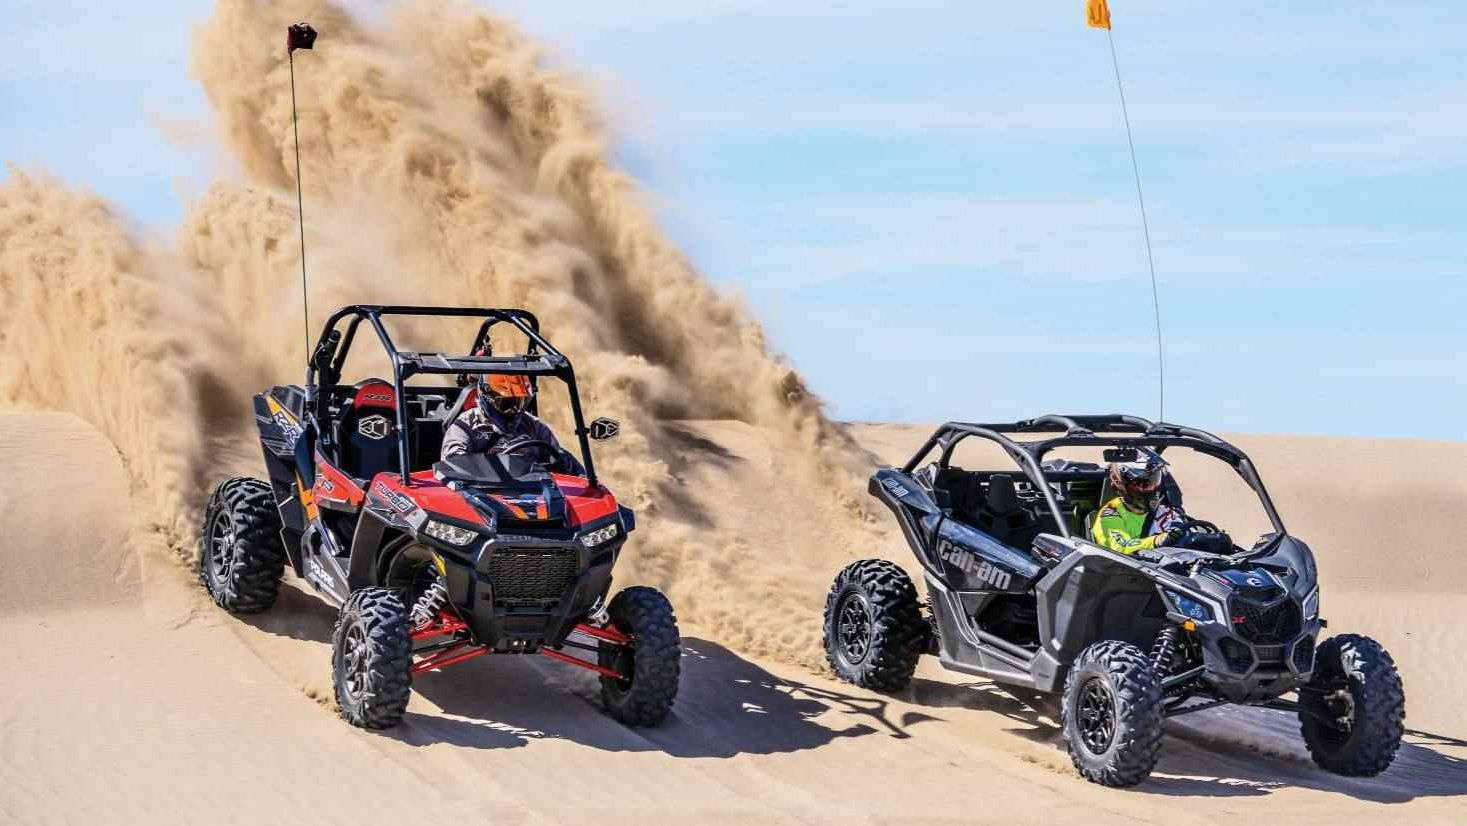 Dune Buggy self drive 1000cc for 1 hour (1 or 2 Seaters)